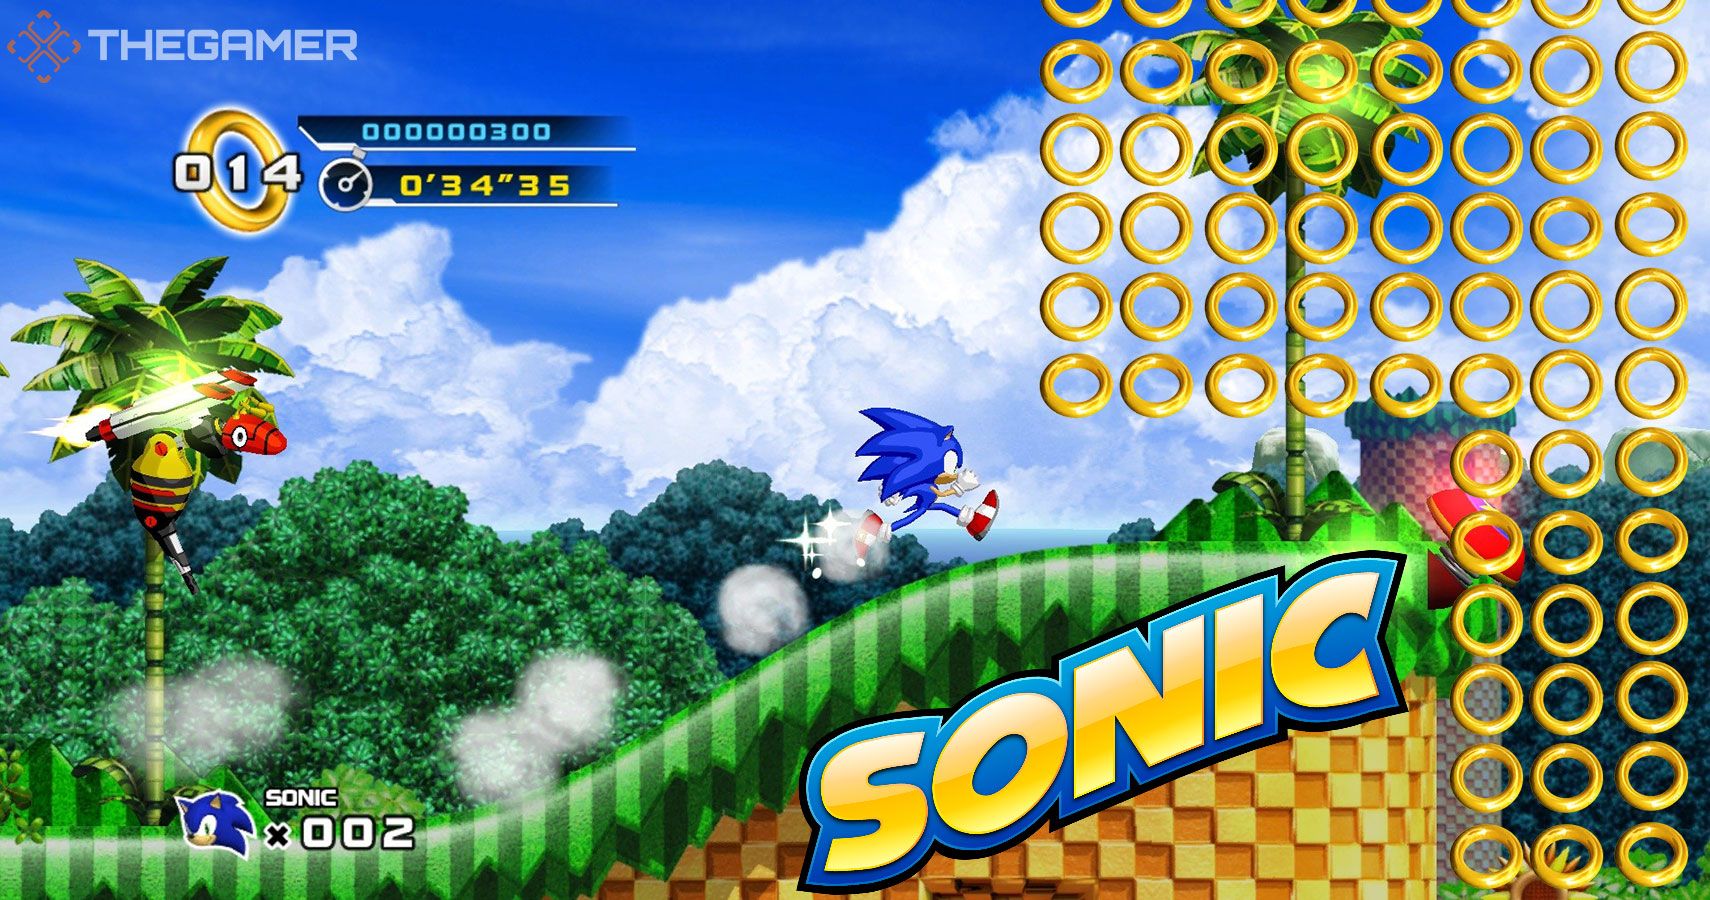 How Sega killed Sonic the Hedgehog and made a surprisingly sincere game -  Los Angeles Times